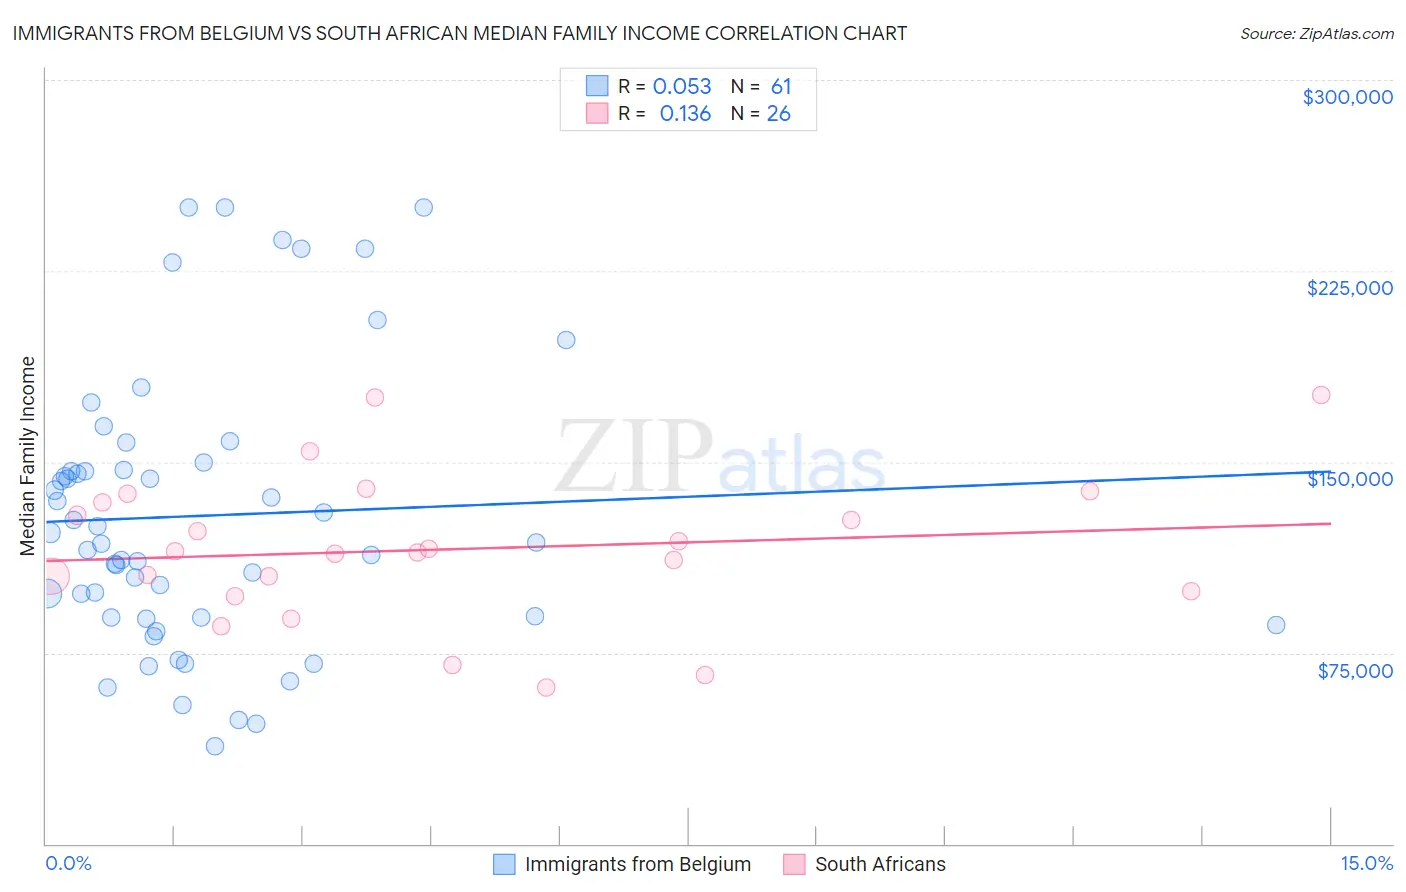 Immigrants from Belgium vs South African Median Family Income